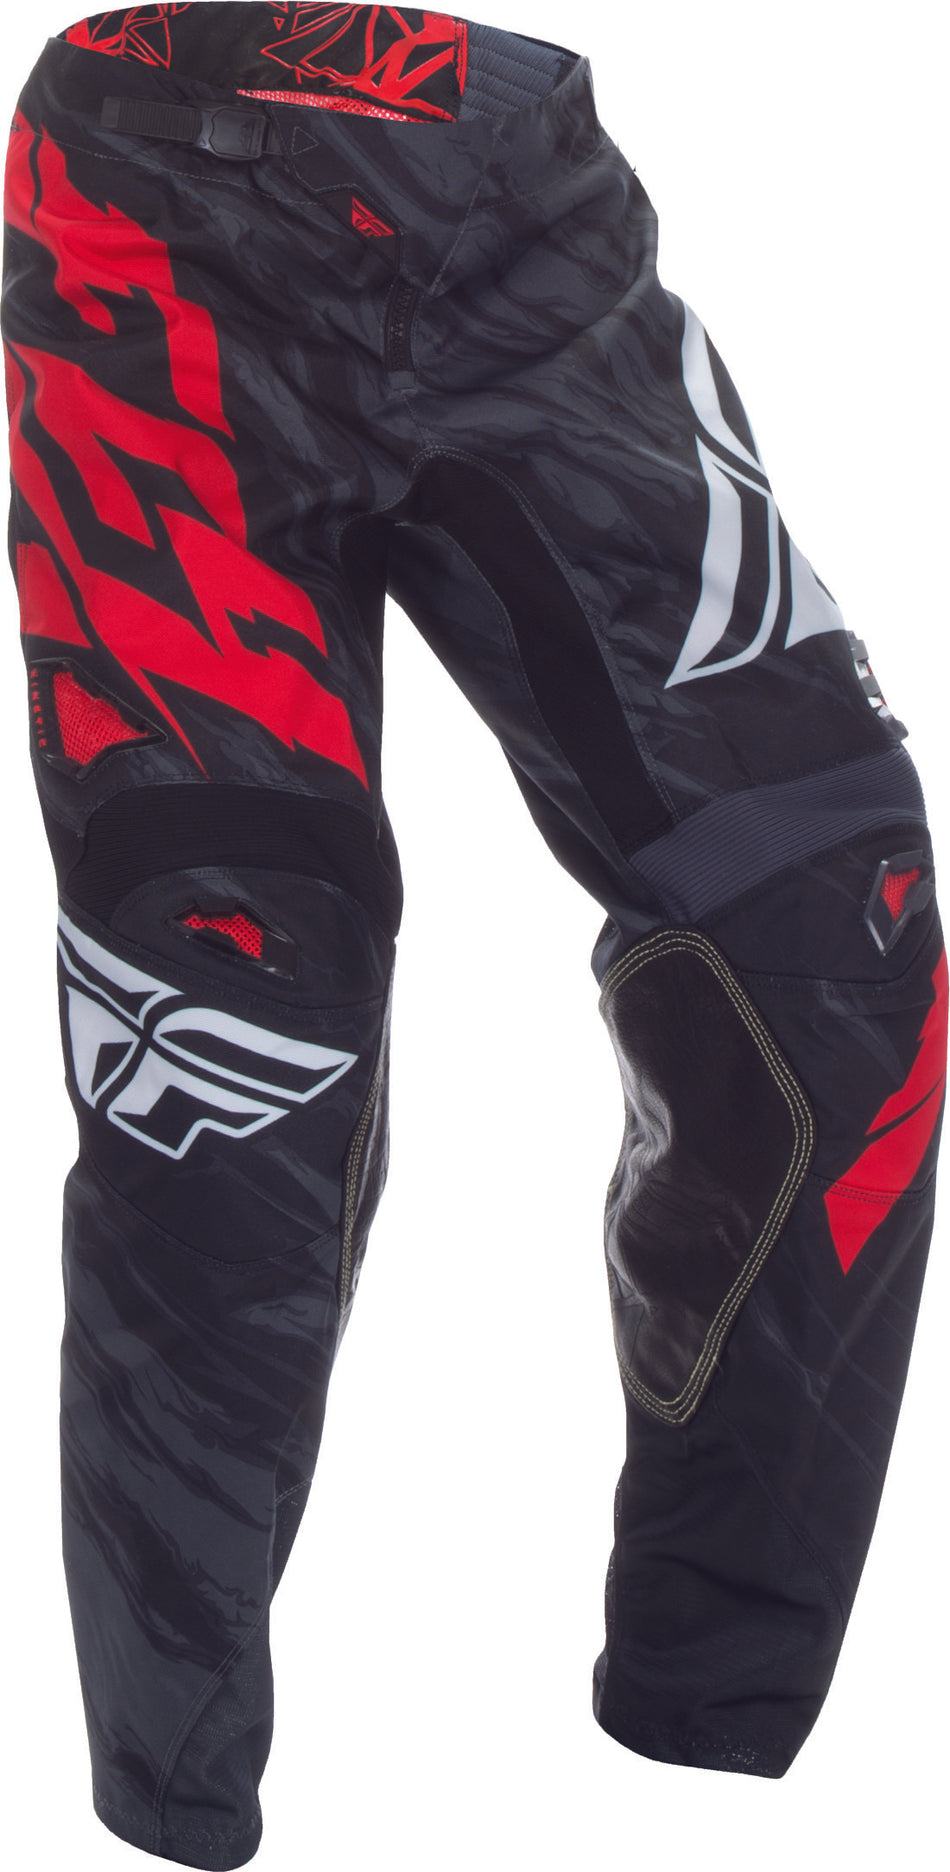 FLY RACING Kinetic Relapse Pant Black/Red Sz 22 370-43022